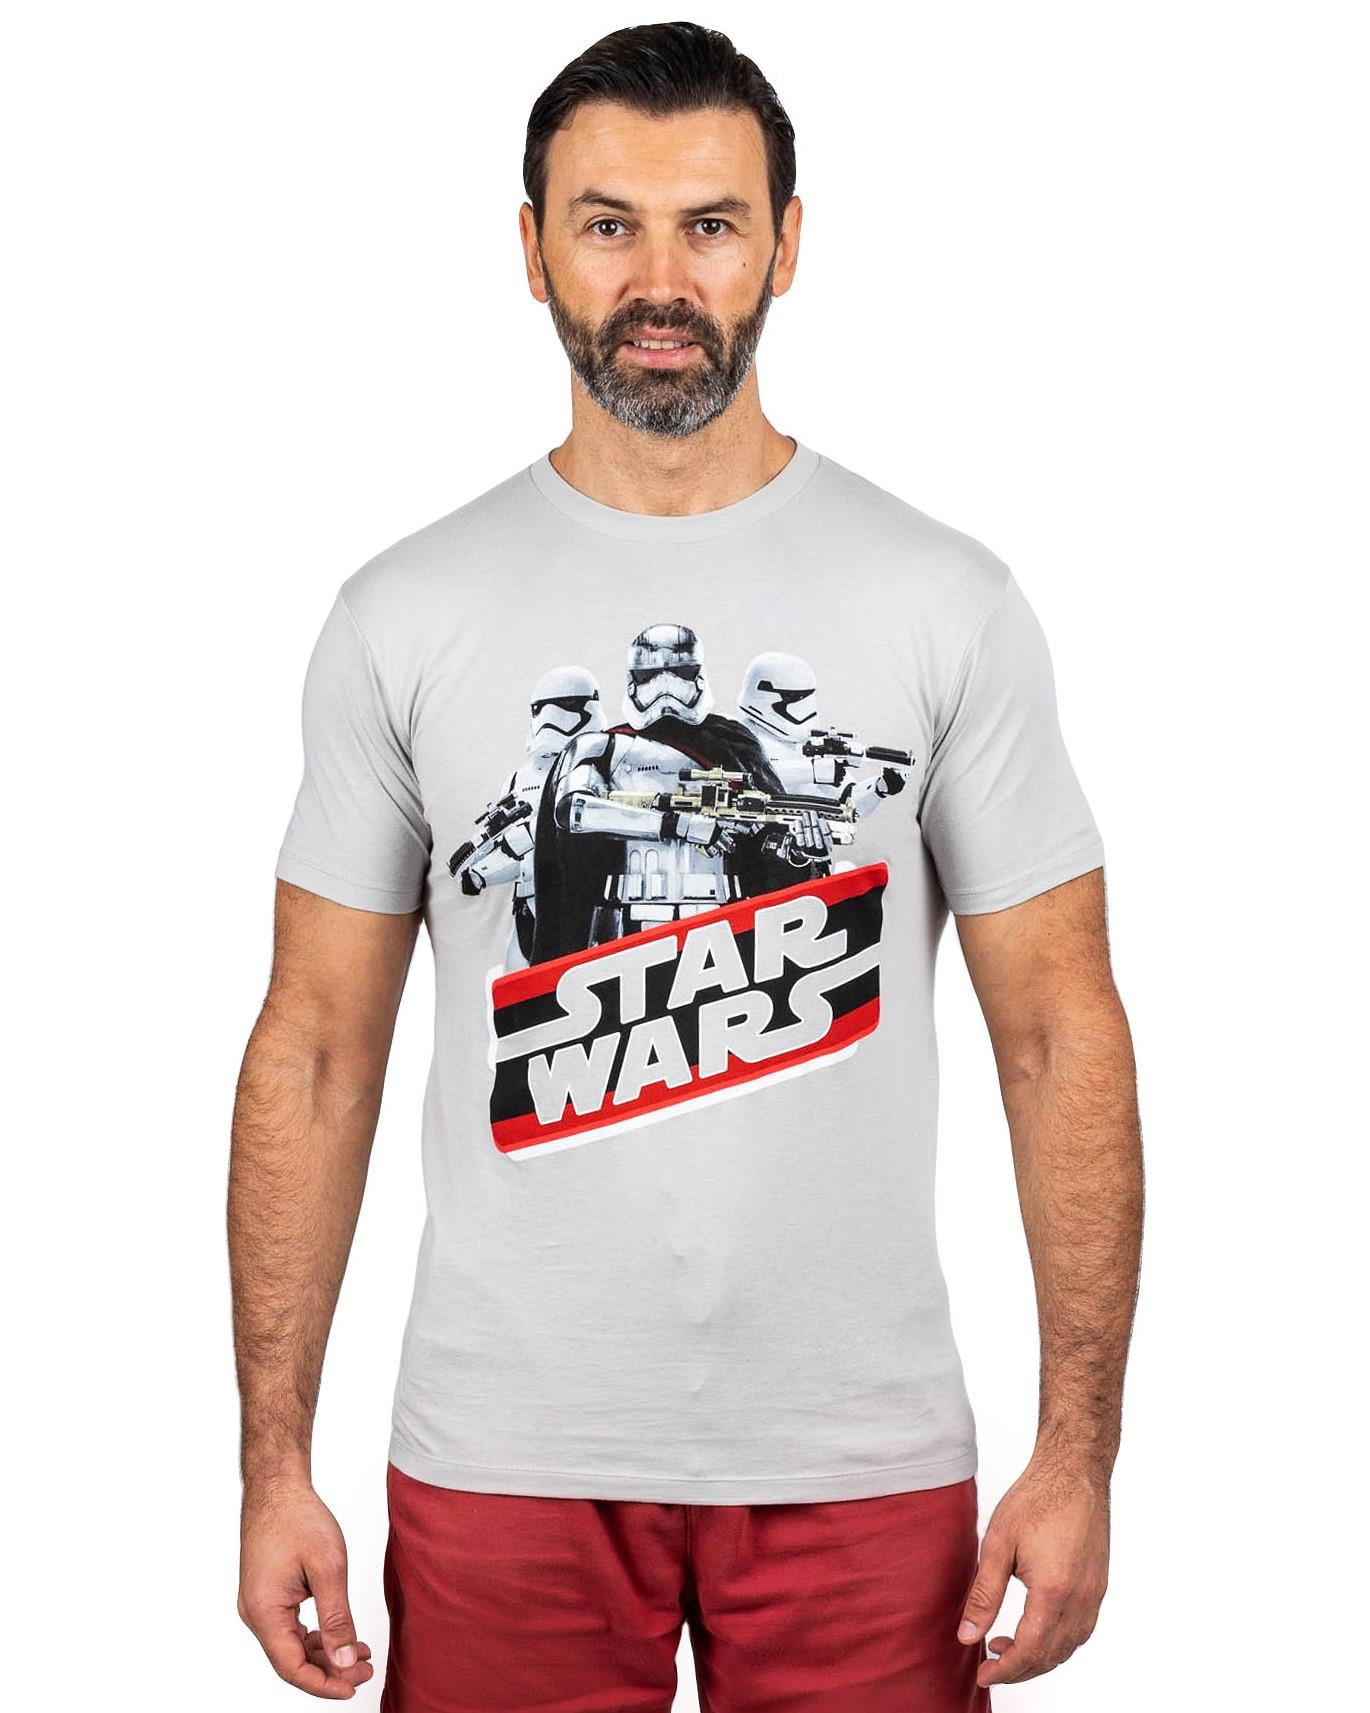 STAR WARS MEN'S XWING BATTLE SUBLIMATED TSHIRT SIZE S THE FORCE AWAKENS  JEDI 